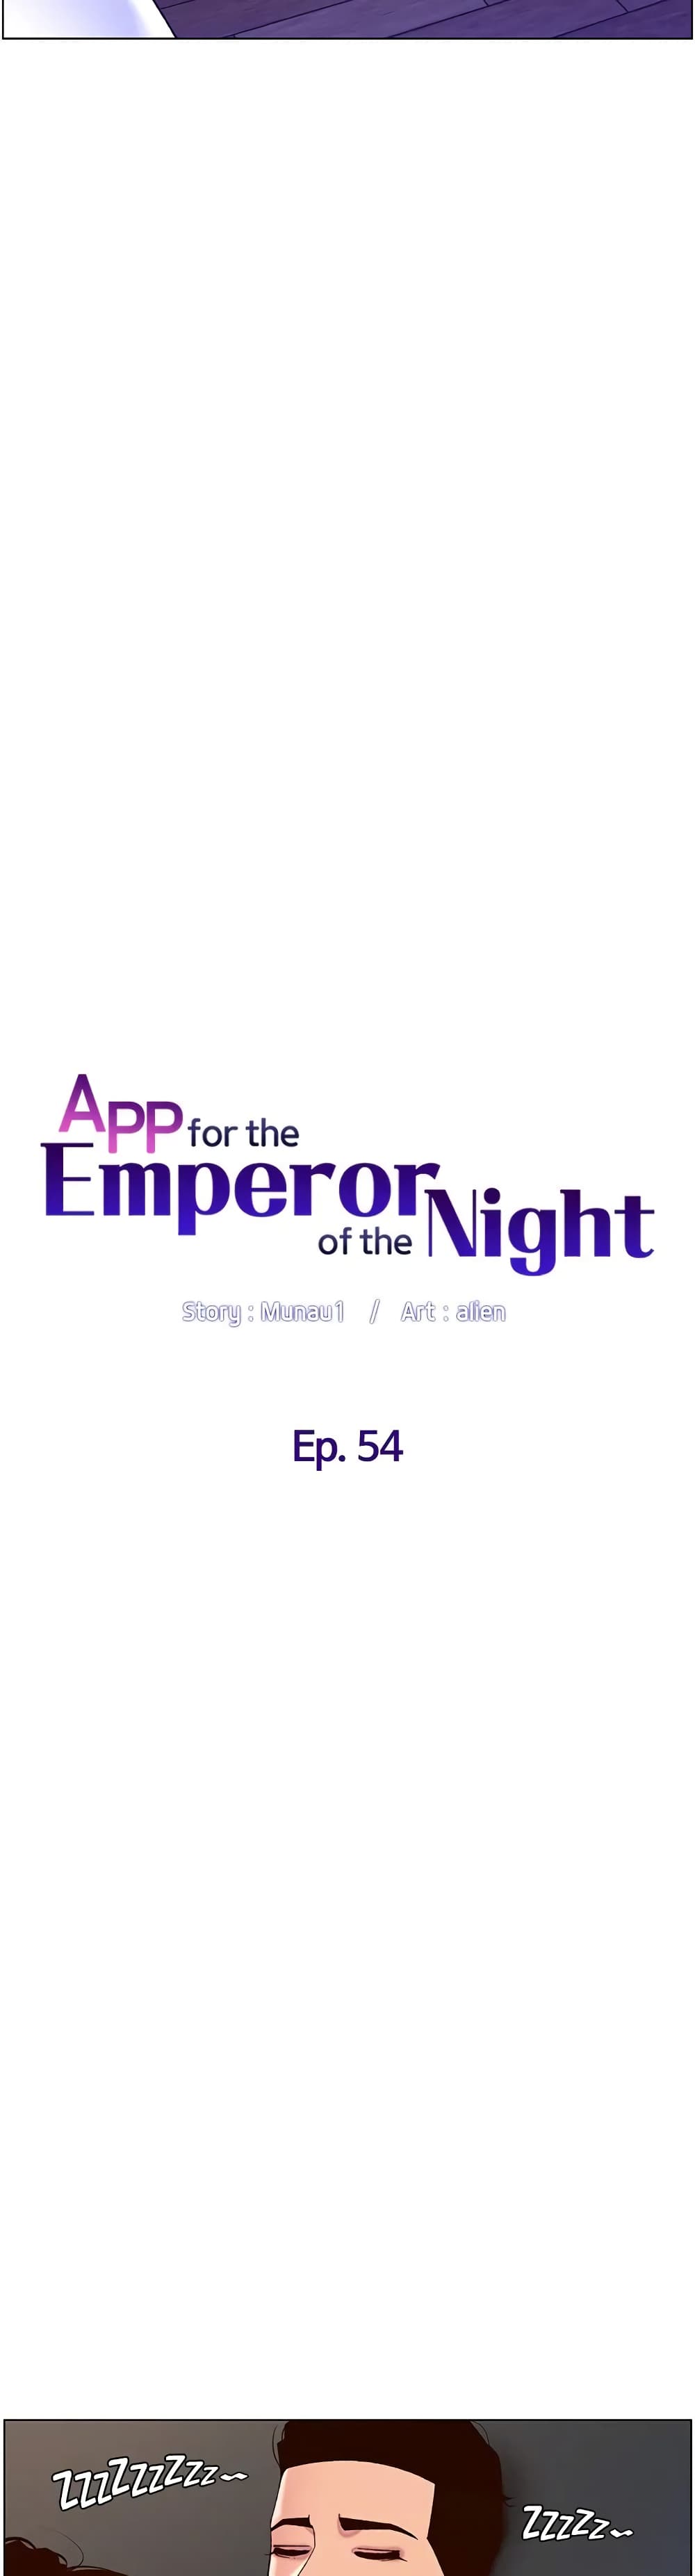 APP for the Emperor of the Night 54-54